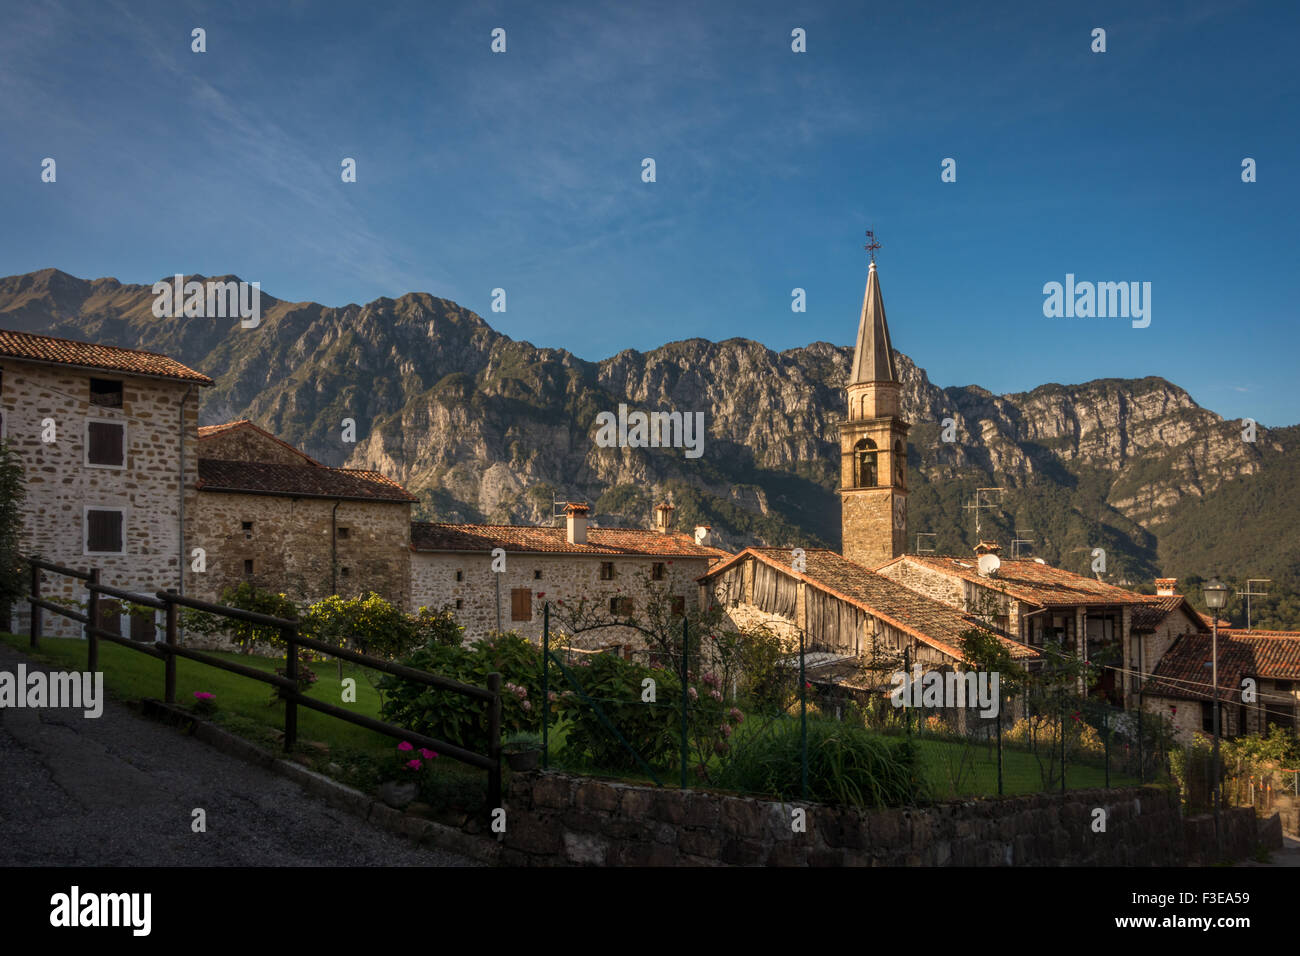 Frisanco - an exceptionally pretty village in the Veneto area of italy renovated after an earthquake. Stock Photo